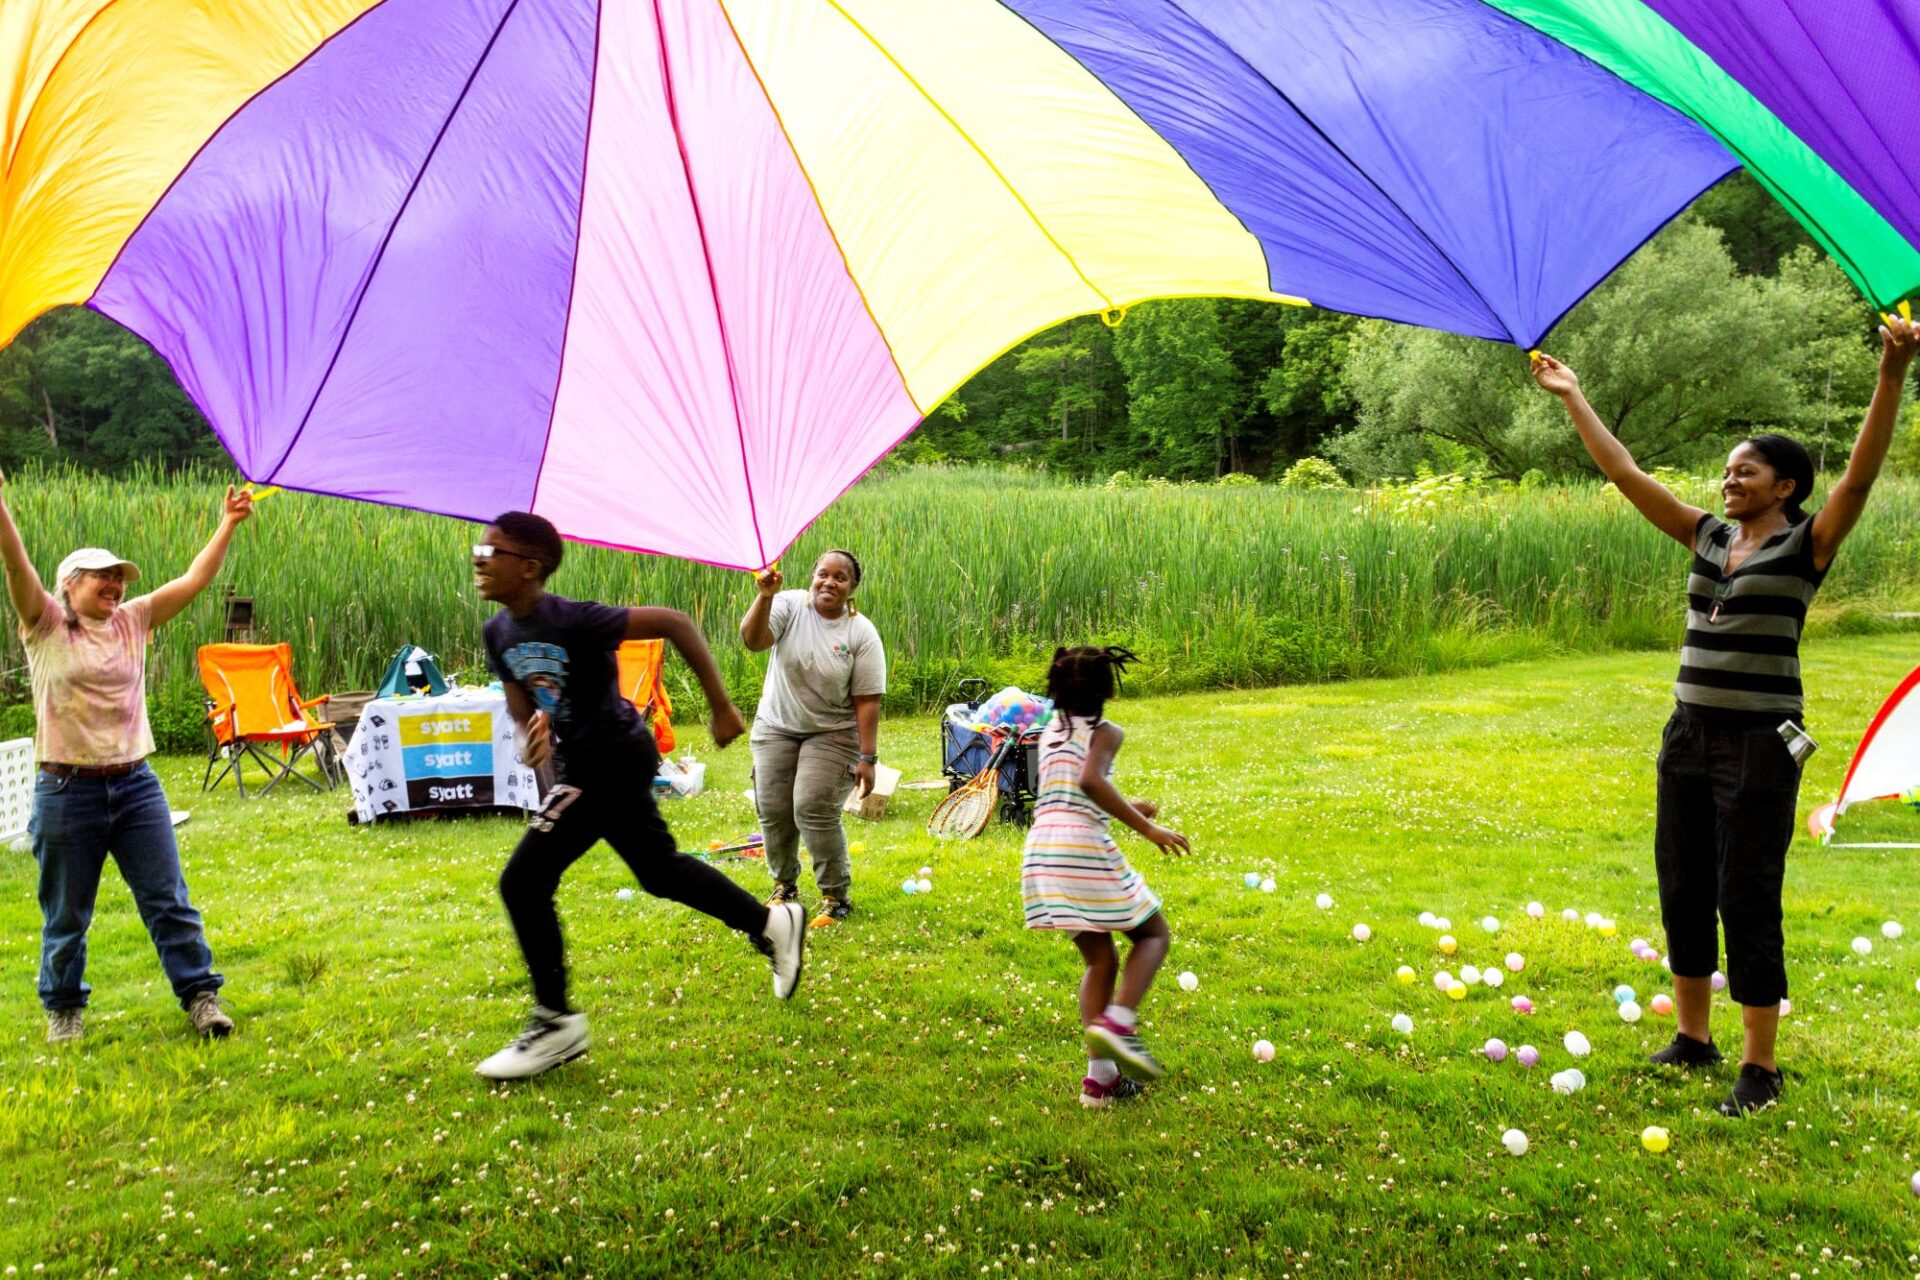 Children playing and running under a parachute during Family Fun Day.